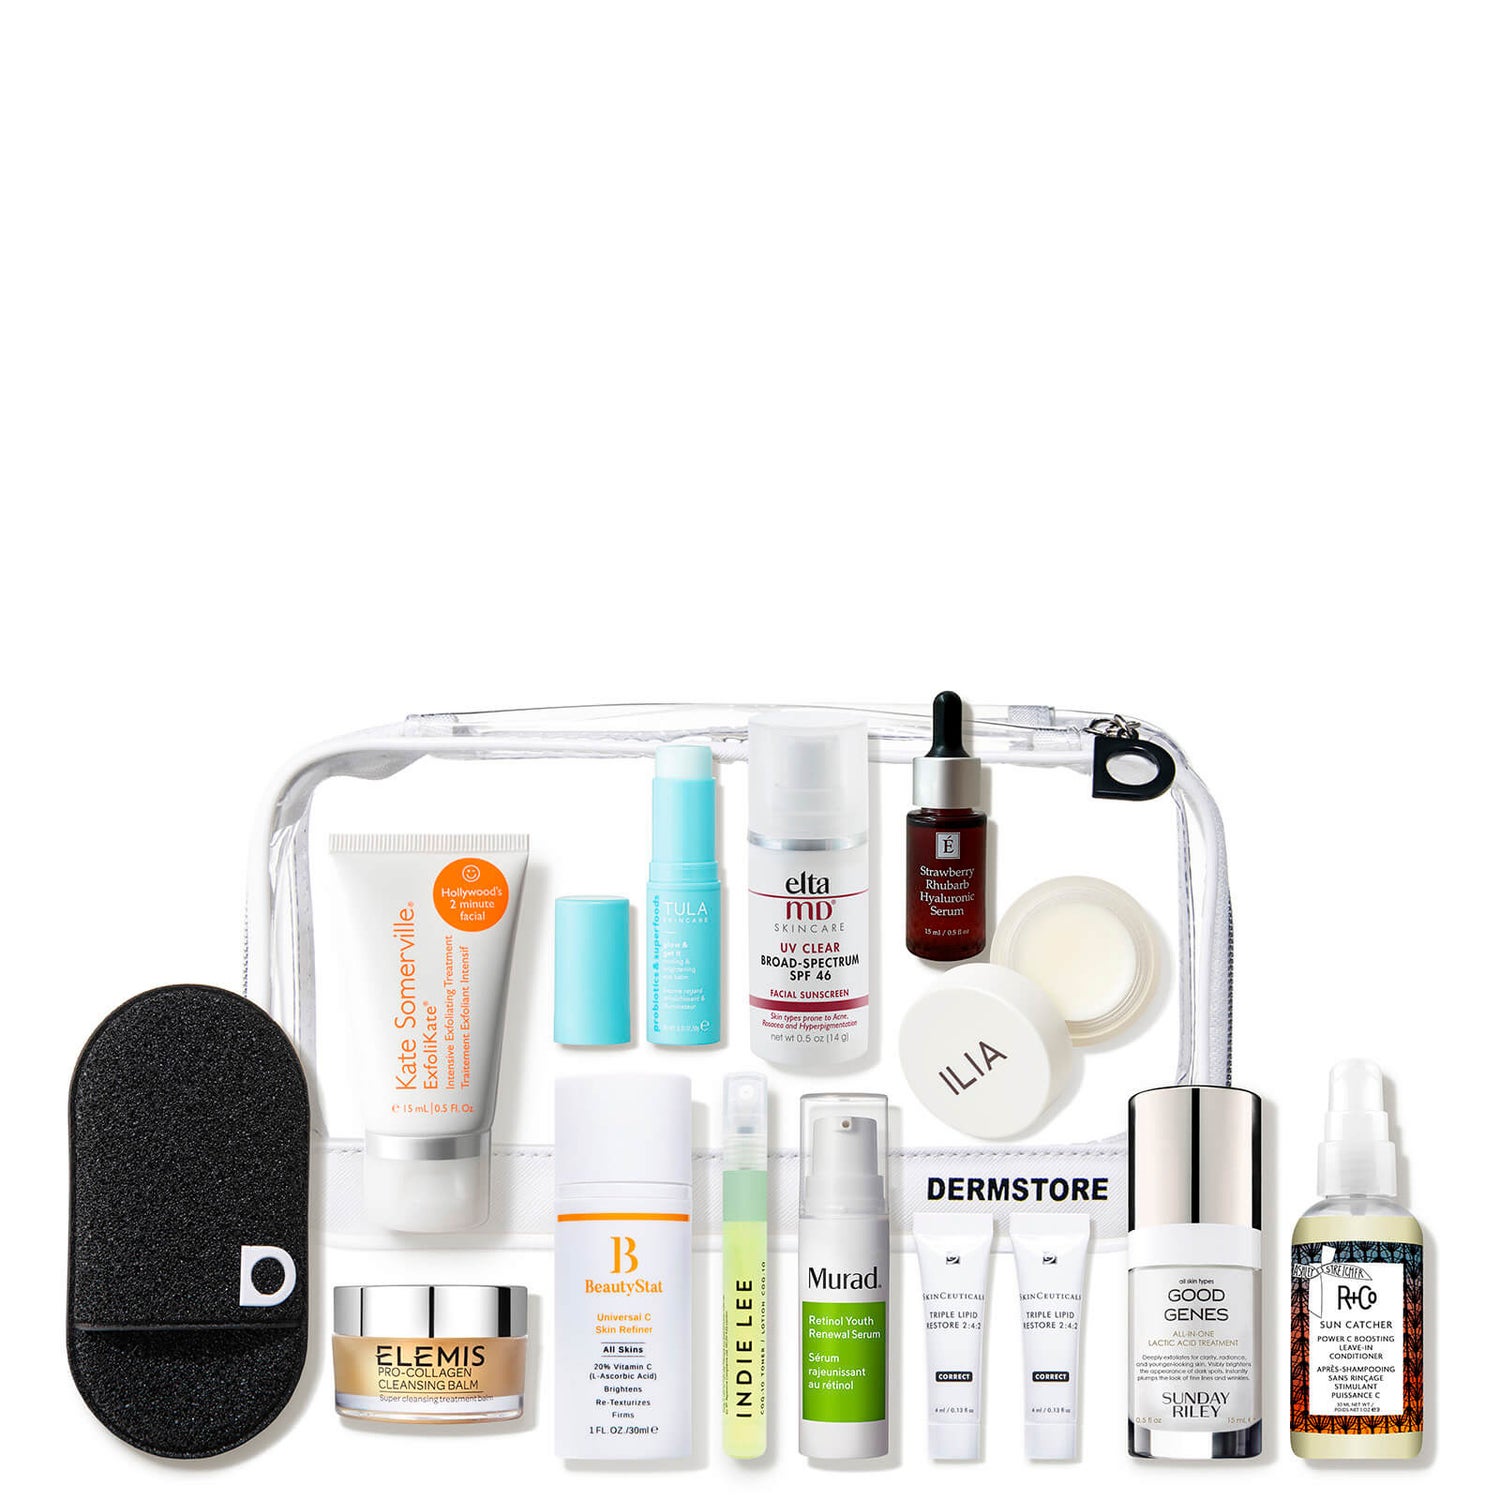 Best of Dermstore The Essential Set - Value $271.13